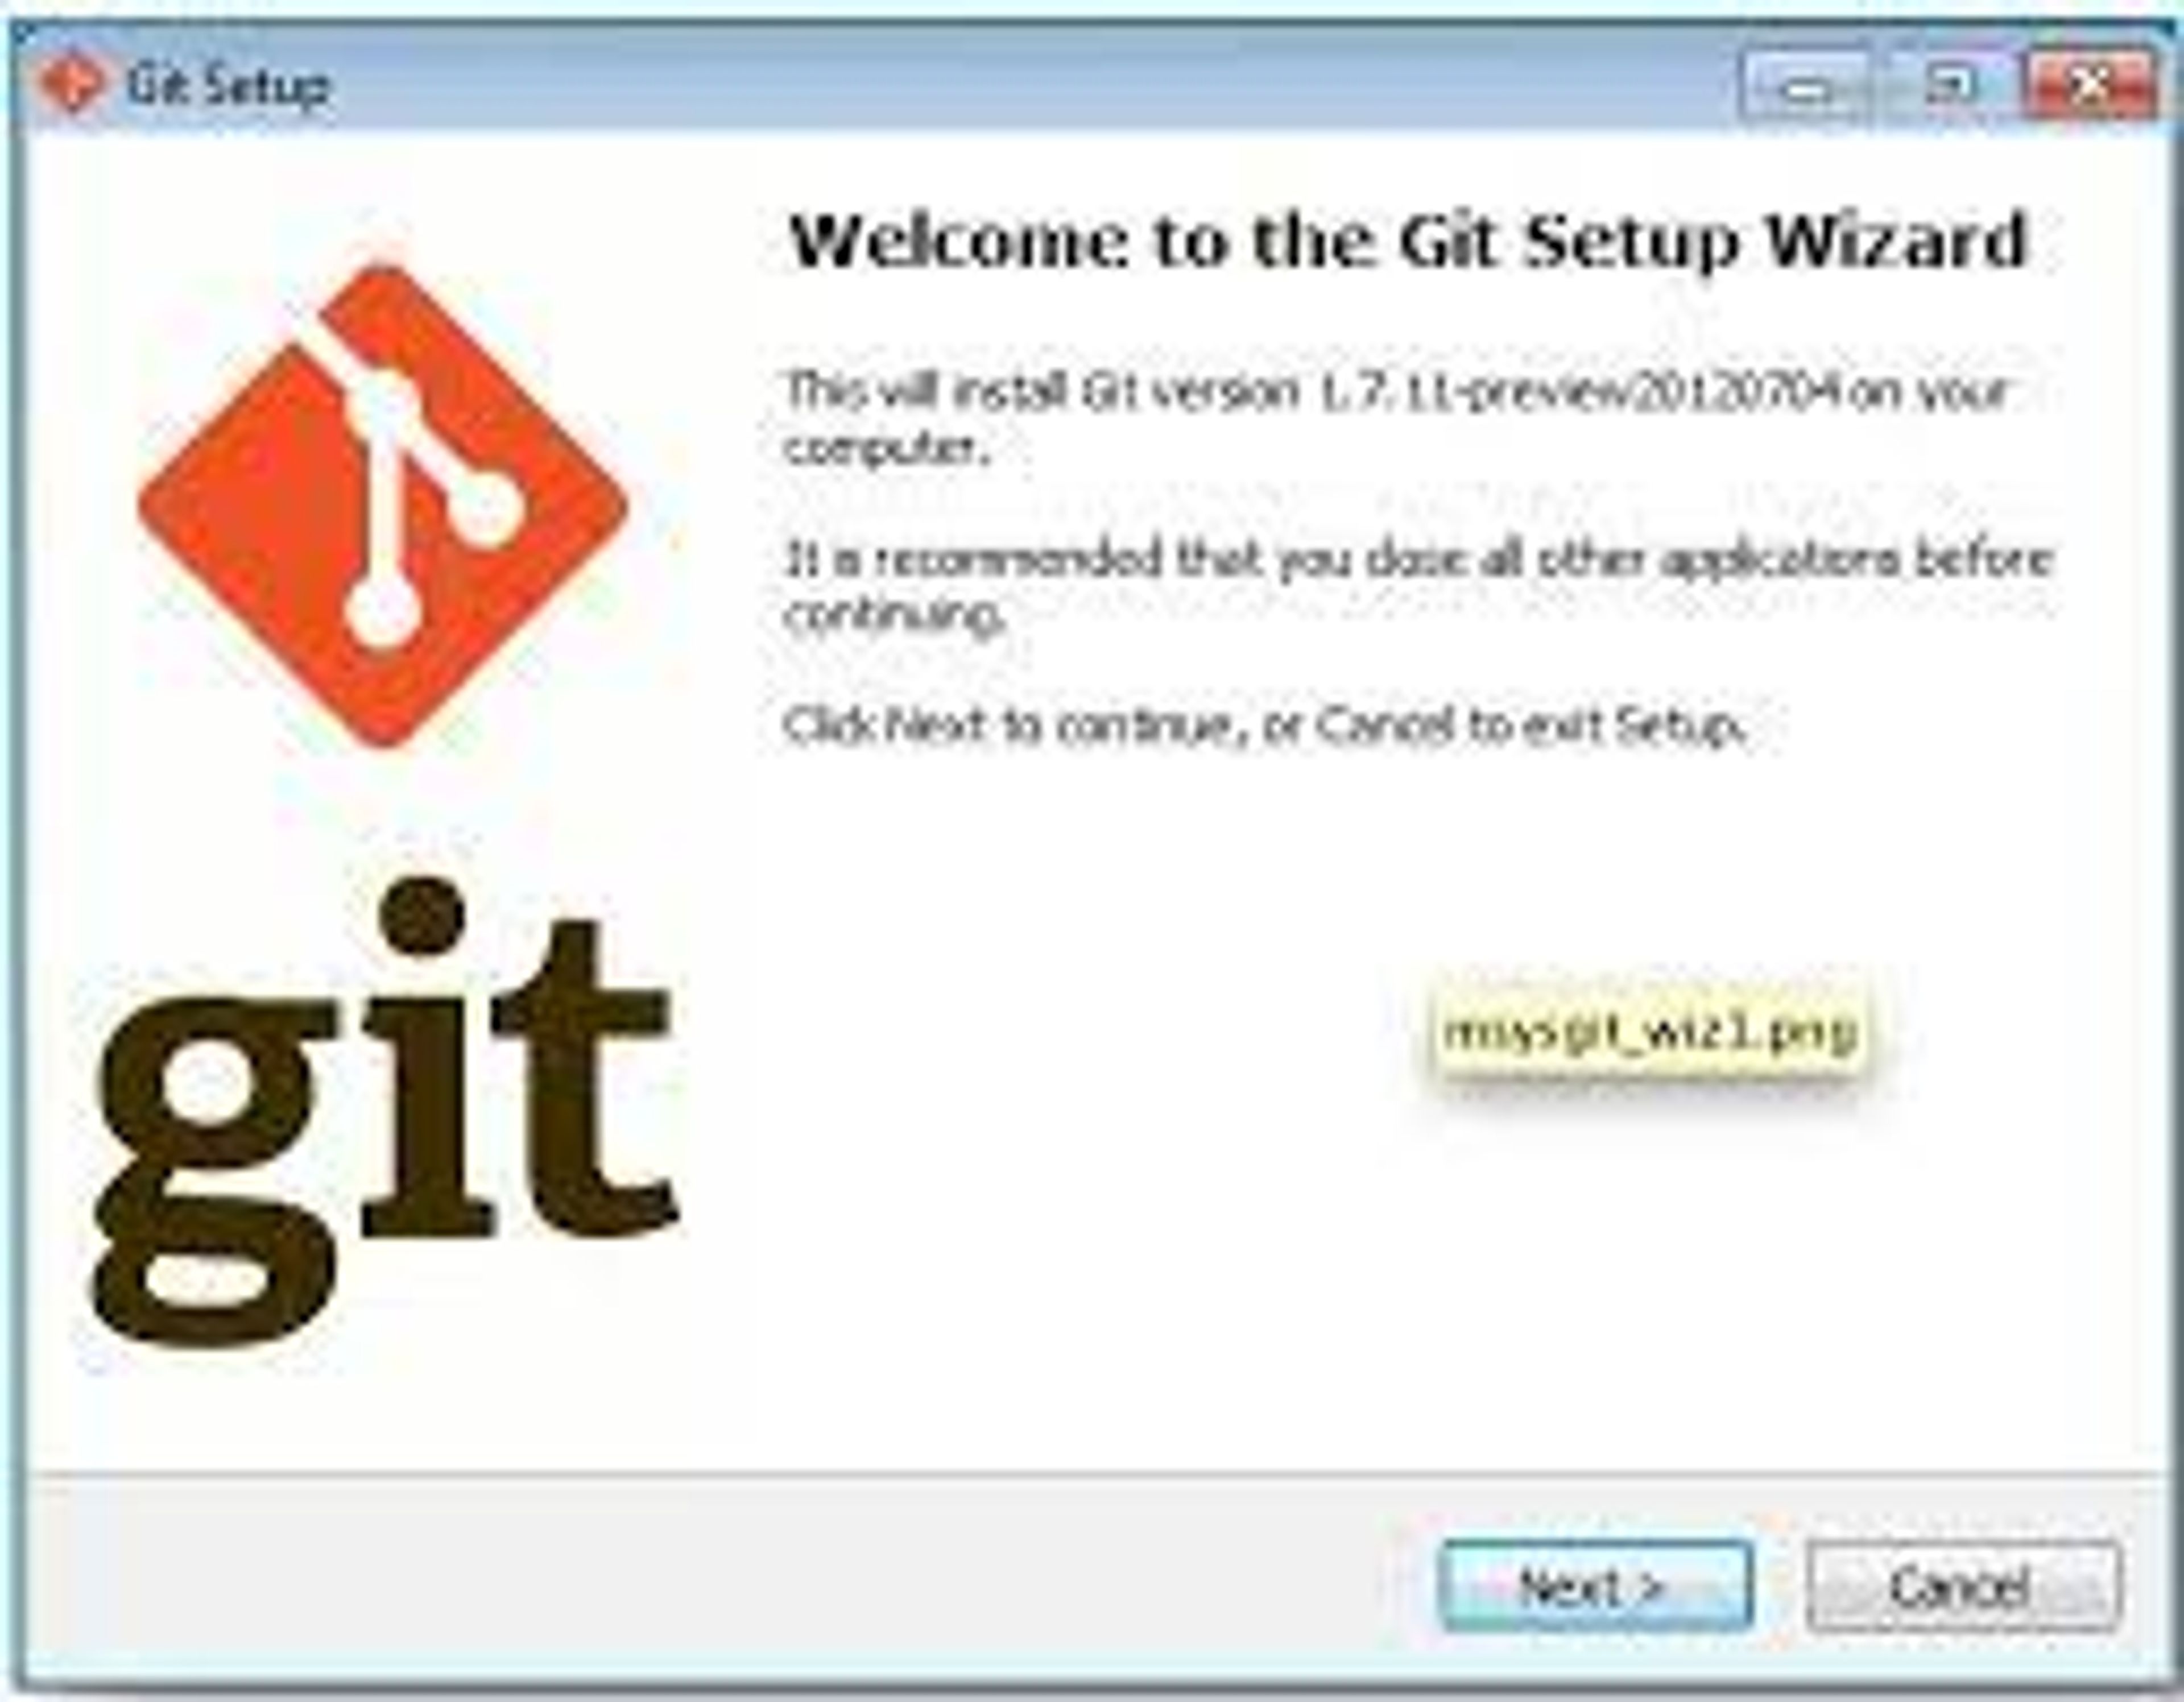 Cover Image for steps to install Git on windows